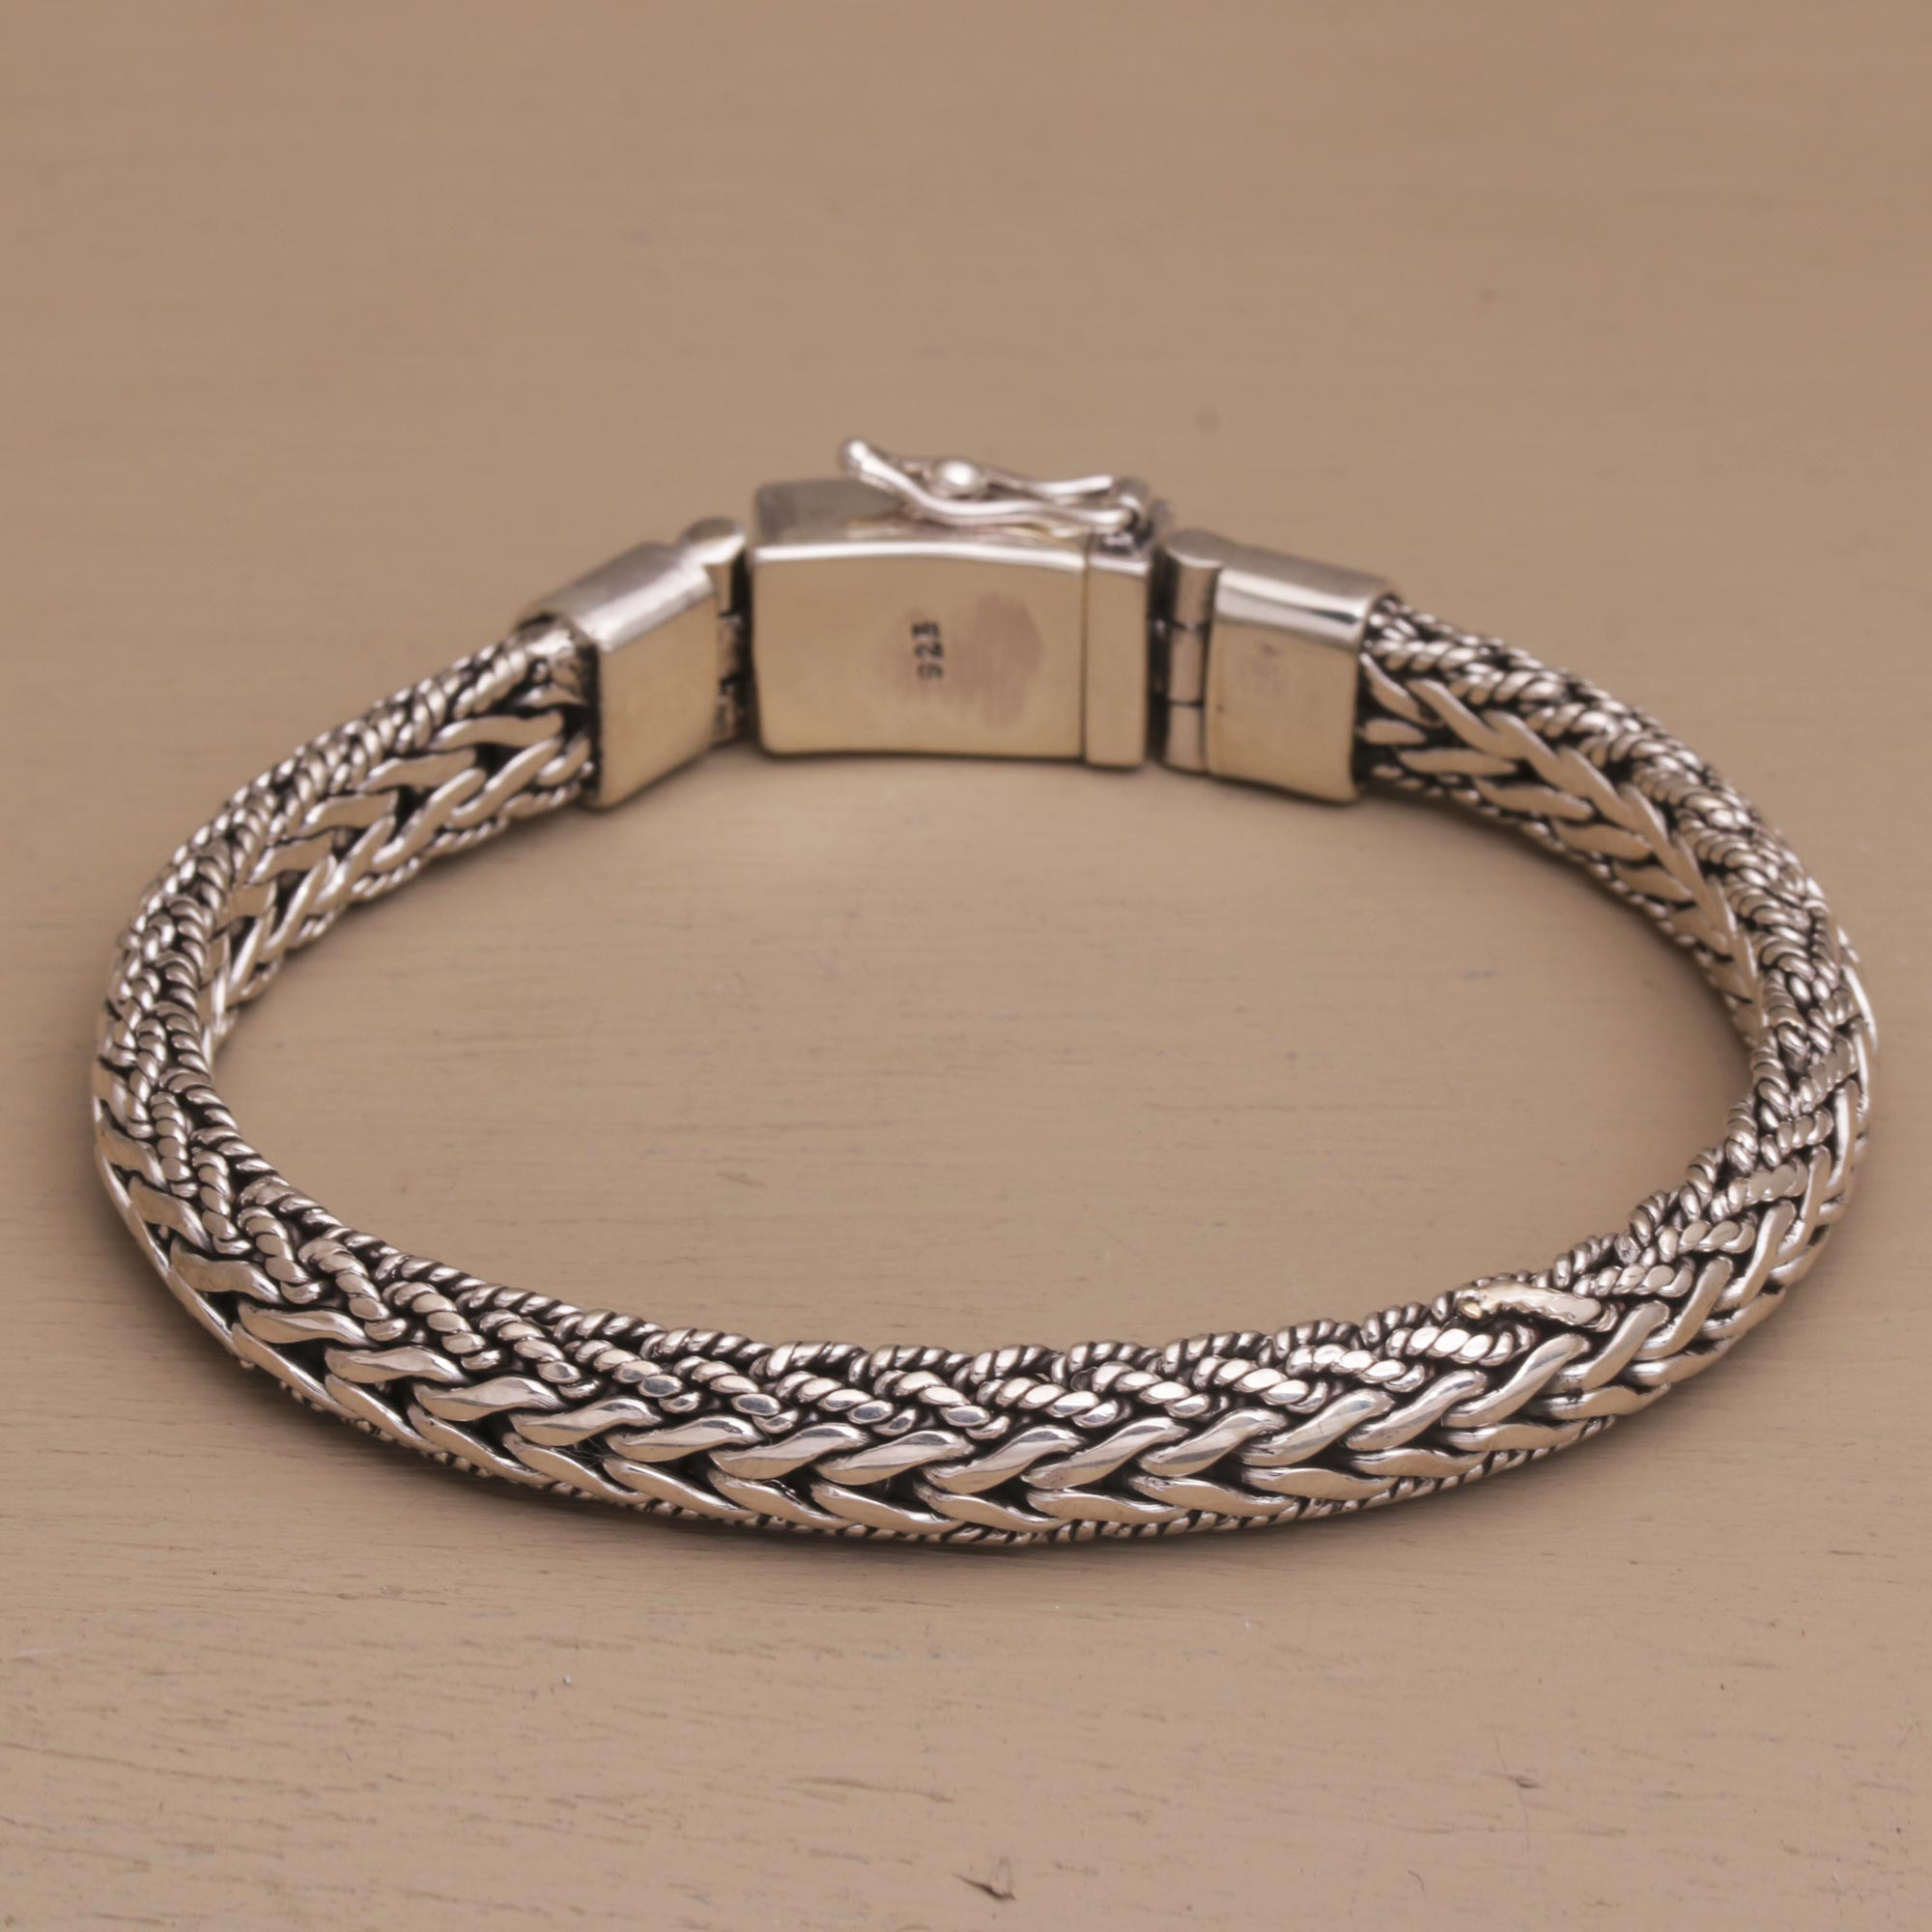 Sterling Silver Chain Wristband Bracelet from Bali - Intrepid